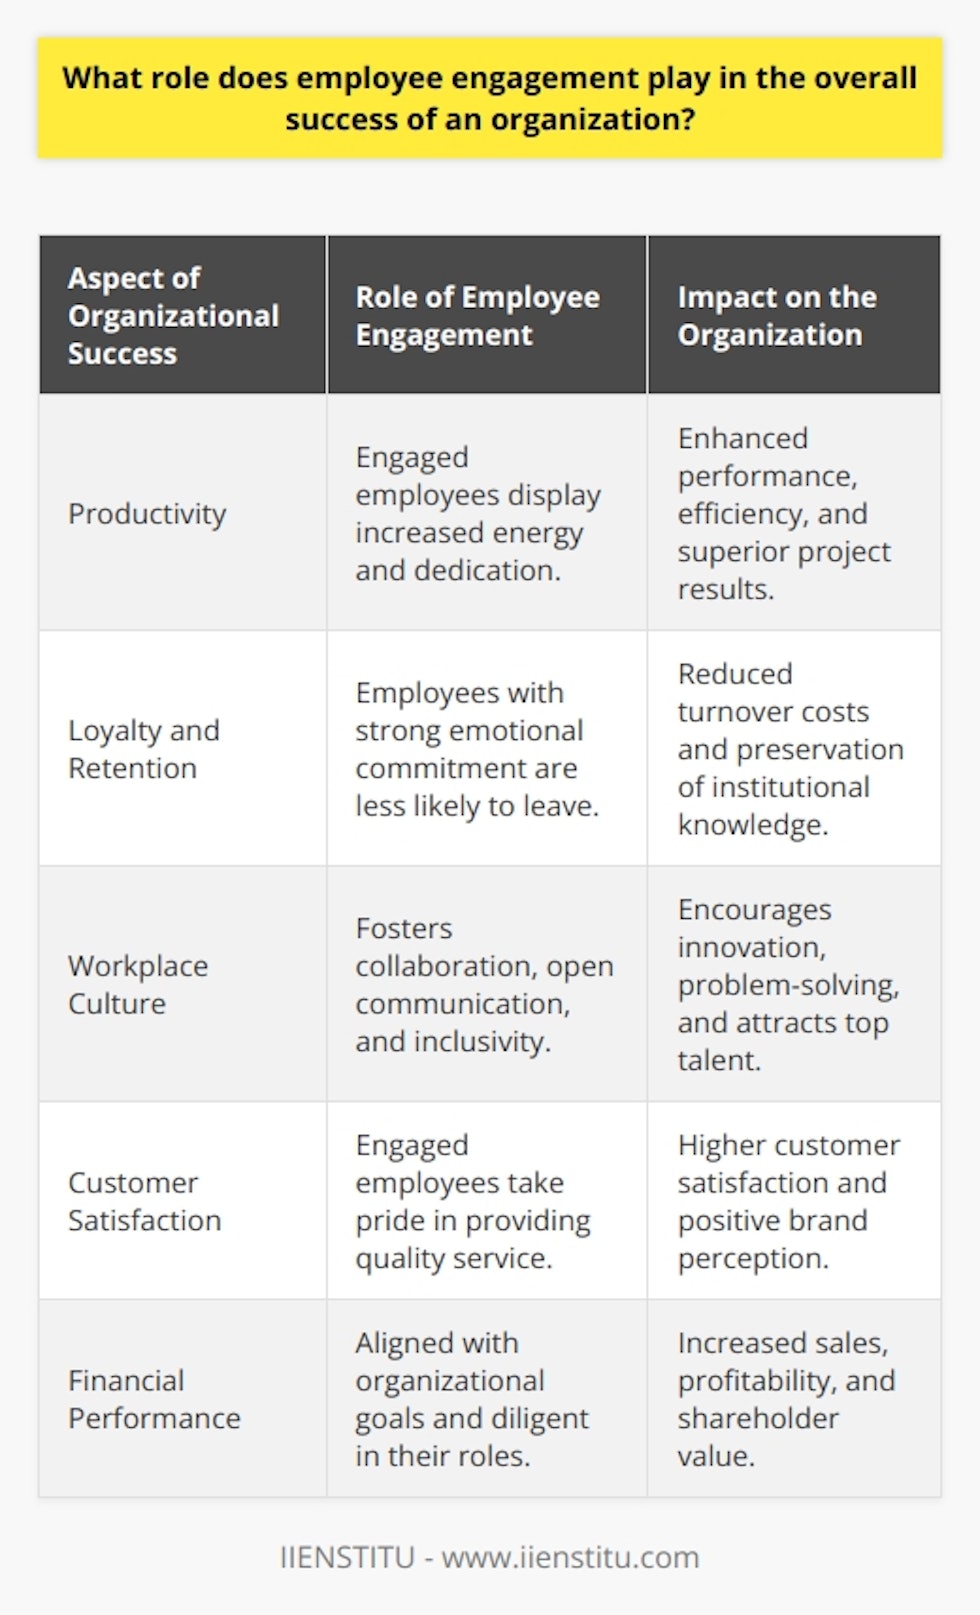 Employee engagement is fundamental to the success of any organization, acting as a key component that influences various dimensions of workplace dynamics, from individual performance to organizational outcomes. Engaged employees are those who feel a strong connection to their work and their company, and this connection can elevate the level of effort they pour into their daily tasks.One of the crucial ways in which employee engagement contributes to organizational success is by driving productivity. Engaged employees typically bring more energy and dedication to their job roles, resulting in better performance and productivity. They are more likely to go above and beyond their job descriptions, directly impacting the efficiency and results of the teams and projects they are involved in.Another important role of employee engagement is in the promotion of employee loyalty and retention. High levels of engagement can lead to employees developing a stronger emotional commitment to the organization, making them less likely to leave. This is beneficial for companies since high turnover can be costly in terms of recruitment and training of new staff as well as the loss of institutional knowledge and experience.Additionally, a highly engaged workforce cultivates a vibrant, positive workplace culture. When employees are engaged, they are more inclined to collaborate, communicate openly, and contribute to a supportive and inclusive environment. This kind of culture not only drives internal innovation and creative problem-solving but can also enhance the organization's reputation as an employer, attracting high-caliber candidates willing to contribute their talents.Customer satisfaction and experience is another area positively impacted by employee engagement. Engaged employees that feel a sense of pride in their work are more likely to provide high-quality customer service, leading to satisfied customers. In many cases, the level of employee engagement can be directly linked to customers' perception of the brand or company.Furthermore, there's a clear relationship between employee engagement and financial performance. Engaged employees can directly contribute to better business outcomes, such as higher sales figures, greater profitability, and enhanced shareholder value. Engaged teams are often more aligned with organizational goals and thus contribute more effectively to meeting financial targets.In essence, employee engagement is not just a human resources term, but a crucial business strategy that yields tangible results. Companies like IIENSTITU, with a focus on human-centered professional development, understand that fostering a culture of engagement can lead to a virtuous cycle of success. By putting employee engagement at the forefront, organizations can unlock potential across various aspects of business performance, from the ground floor all the way to the boardroom.